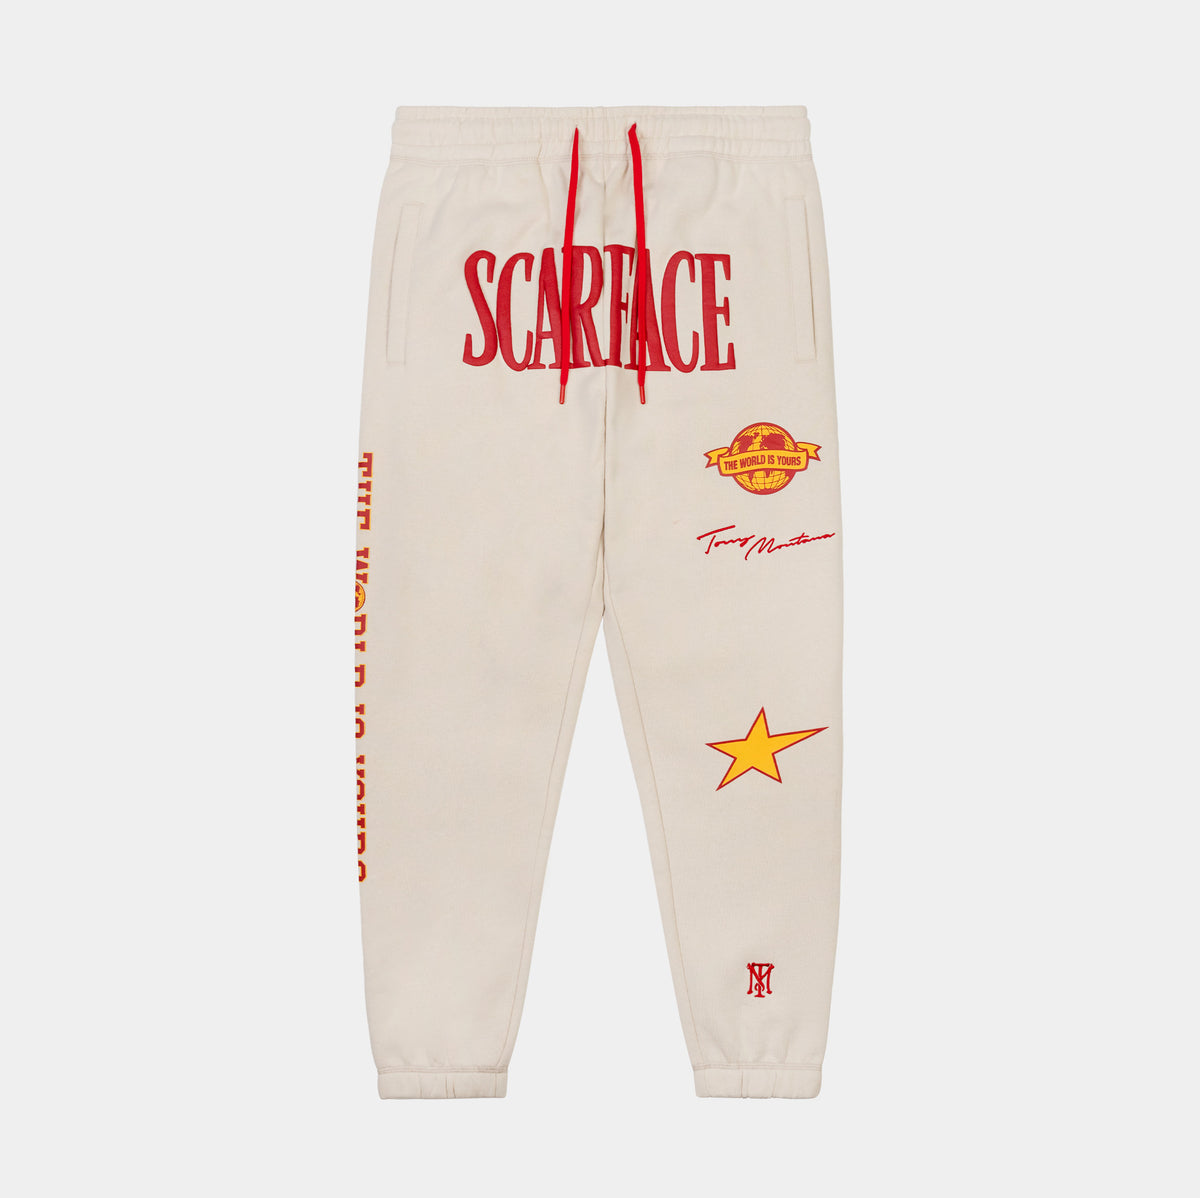 SP x Scarface Stars Joggers Mens Pant (Beige)